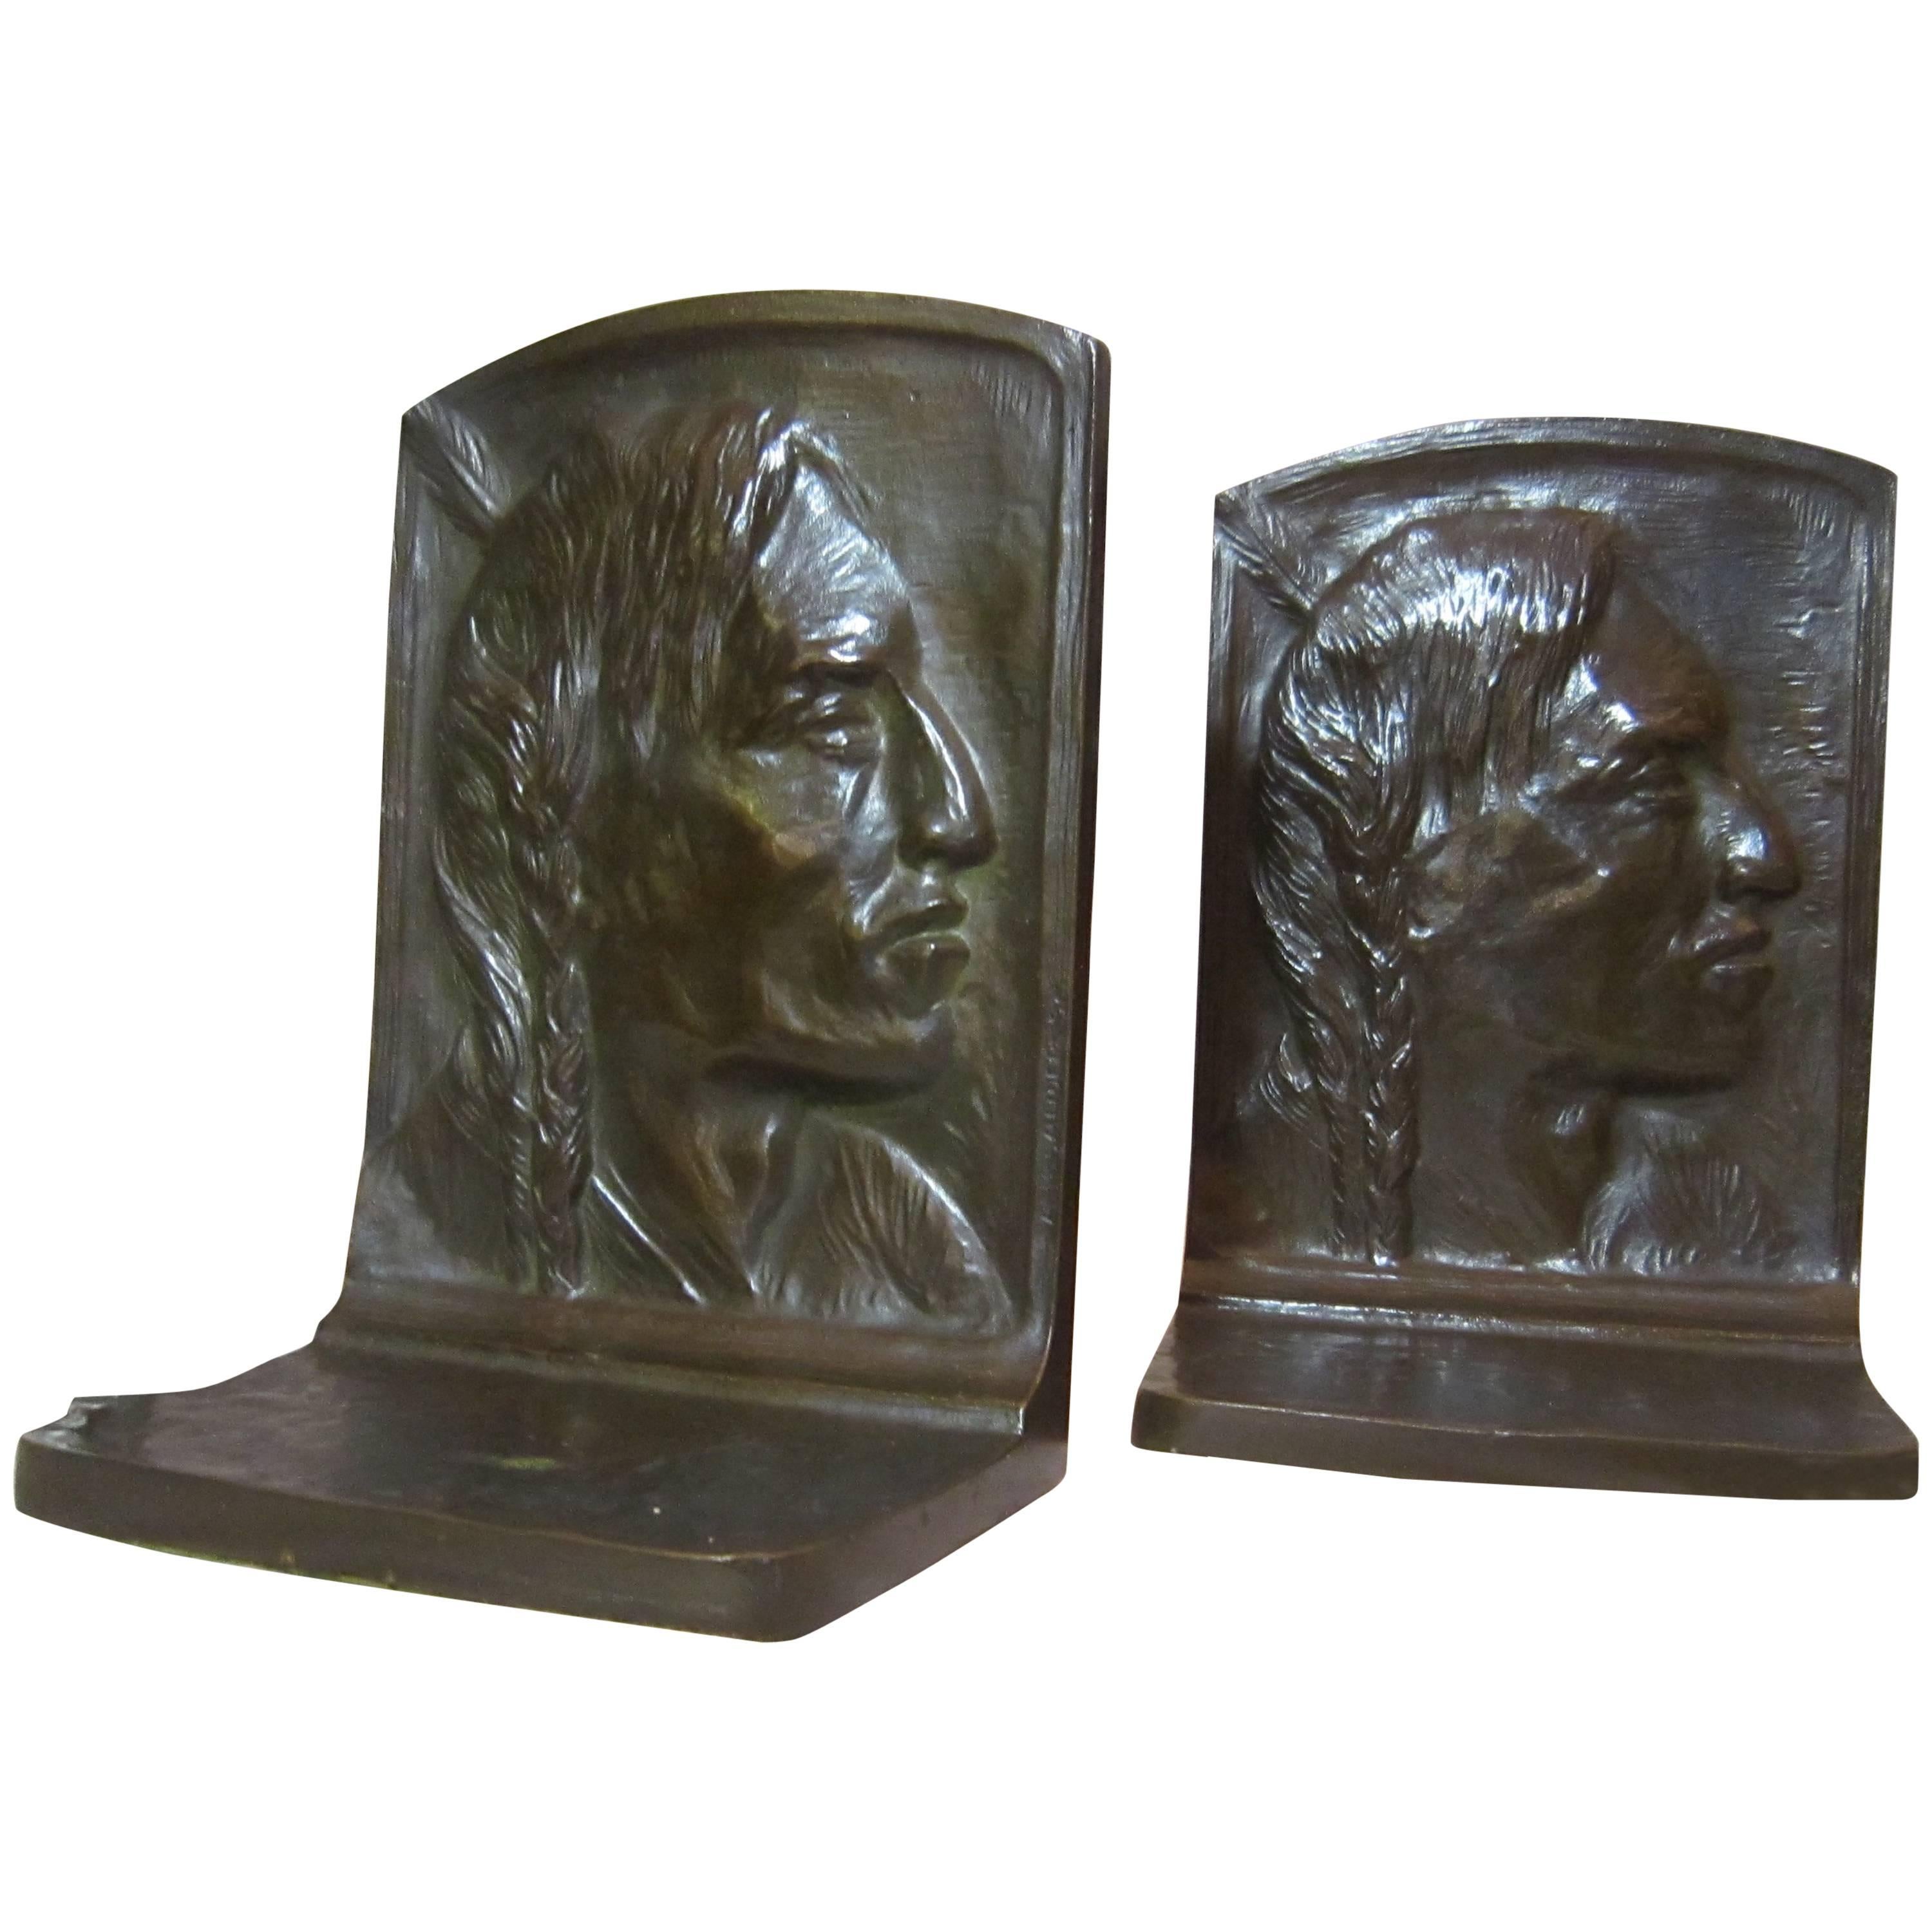 Artist Signed Bronze Bookends of American Indian